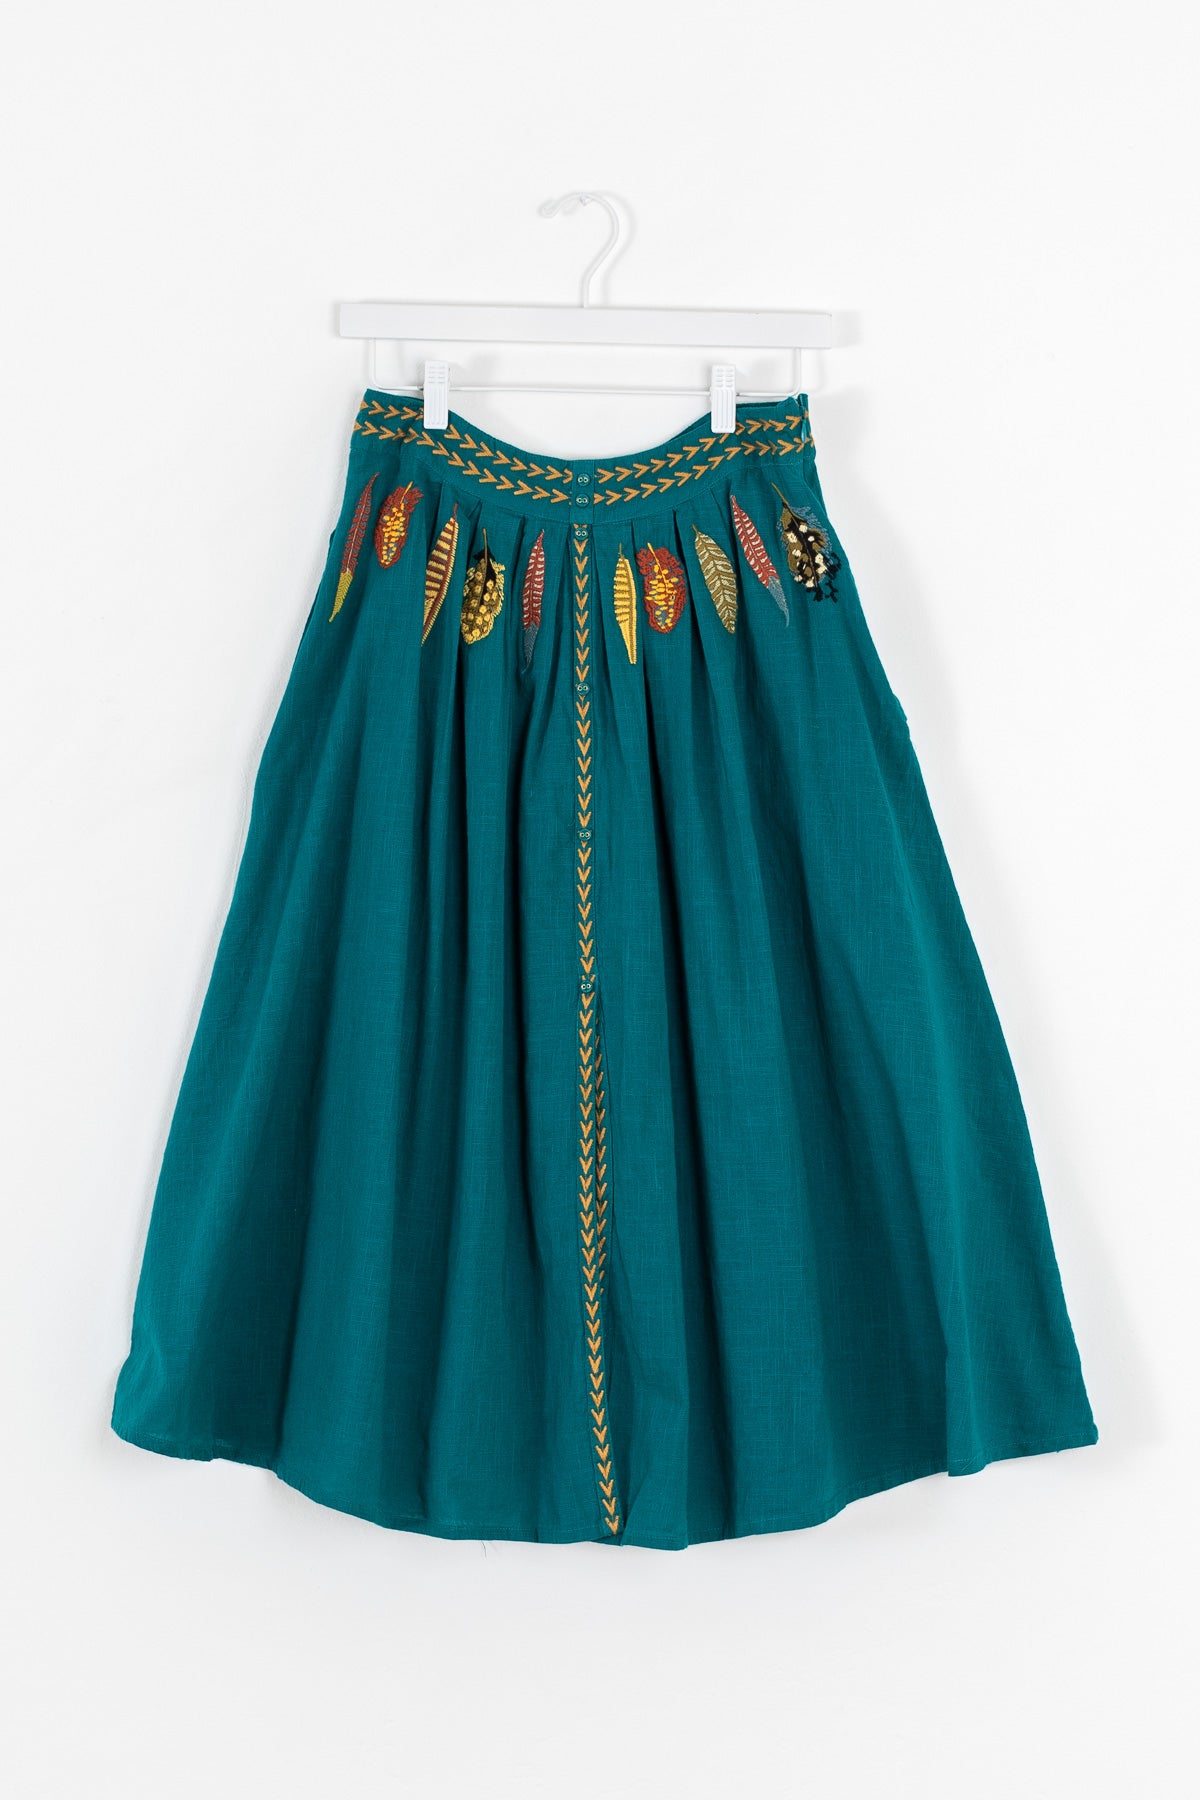 Women's teal midi skirt with gold embroidery | Kariella